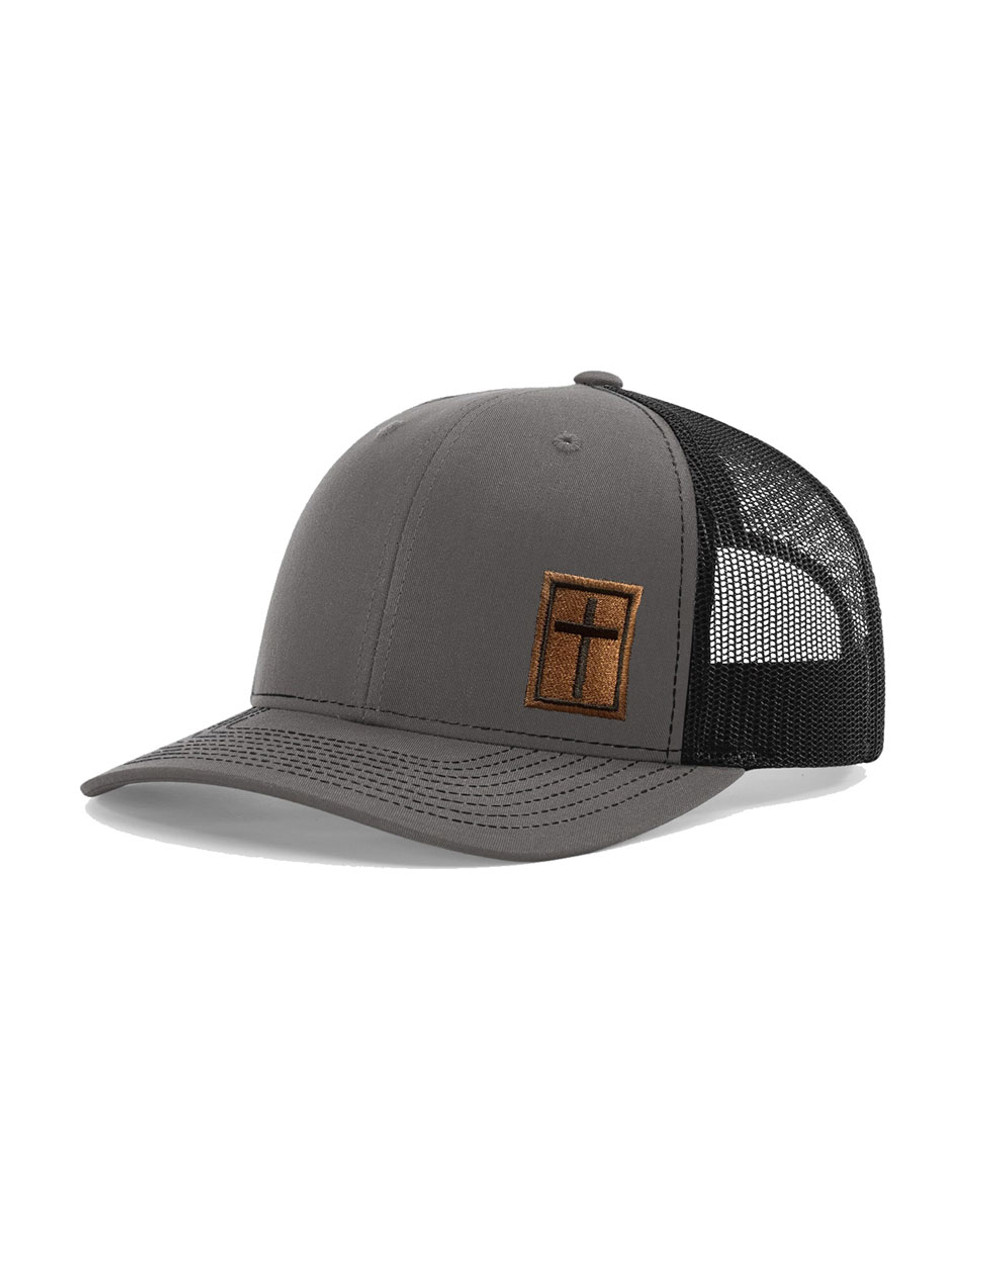 Black and Charcoal Mesh with Wicked North Badge (Richardson 112) Hat